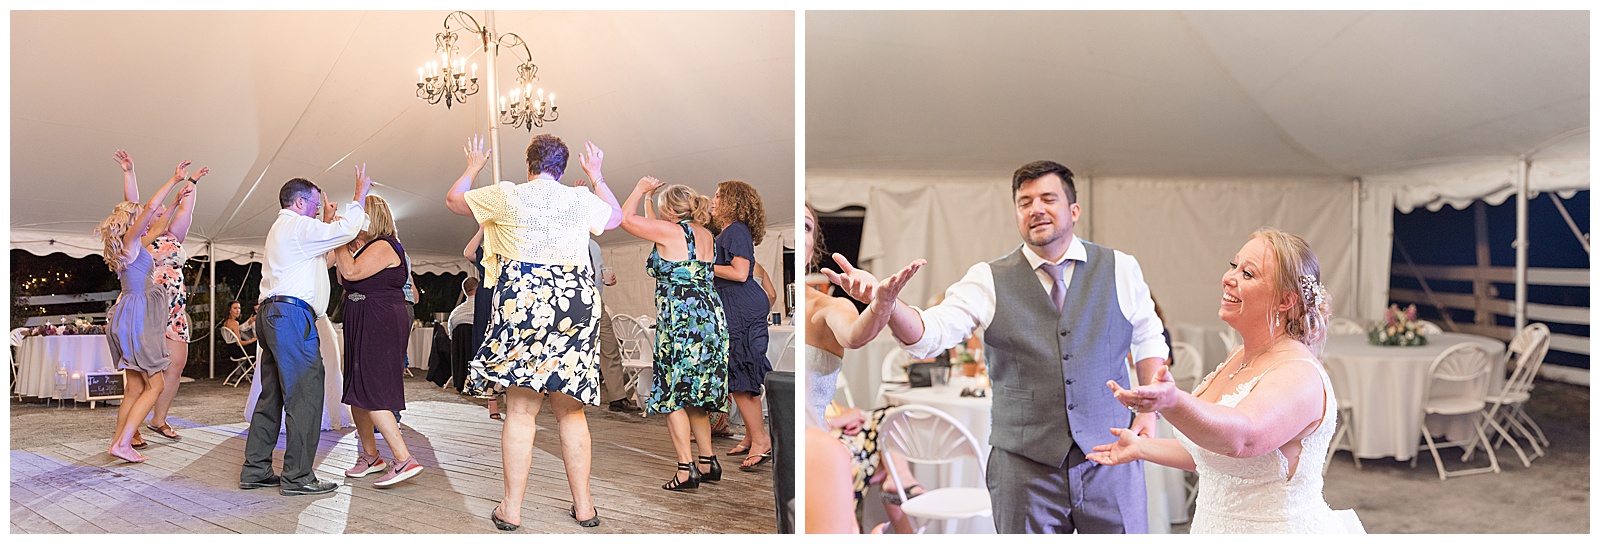 party group dancing at reception at Fallen Tree Farms